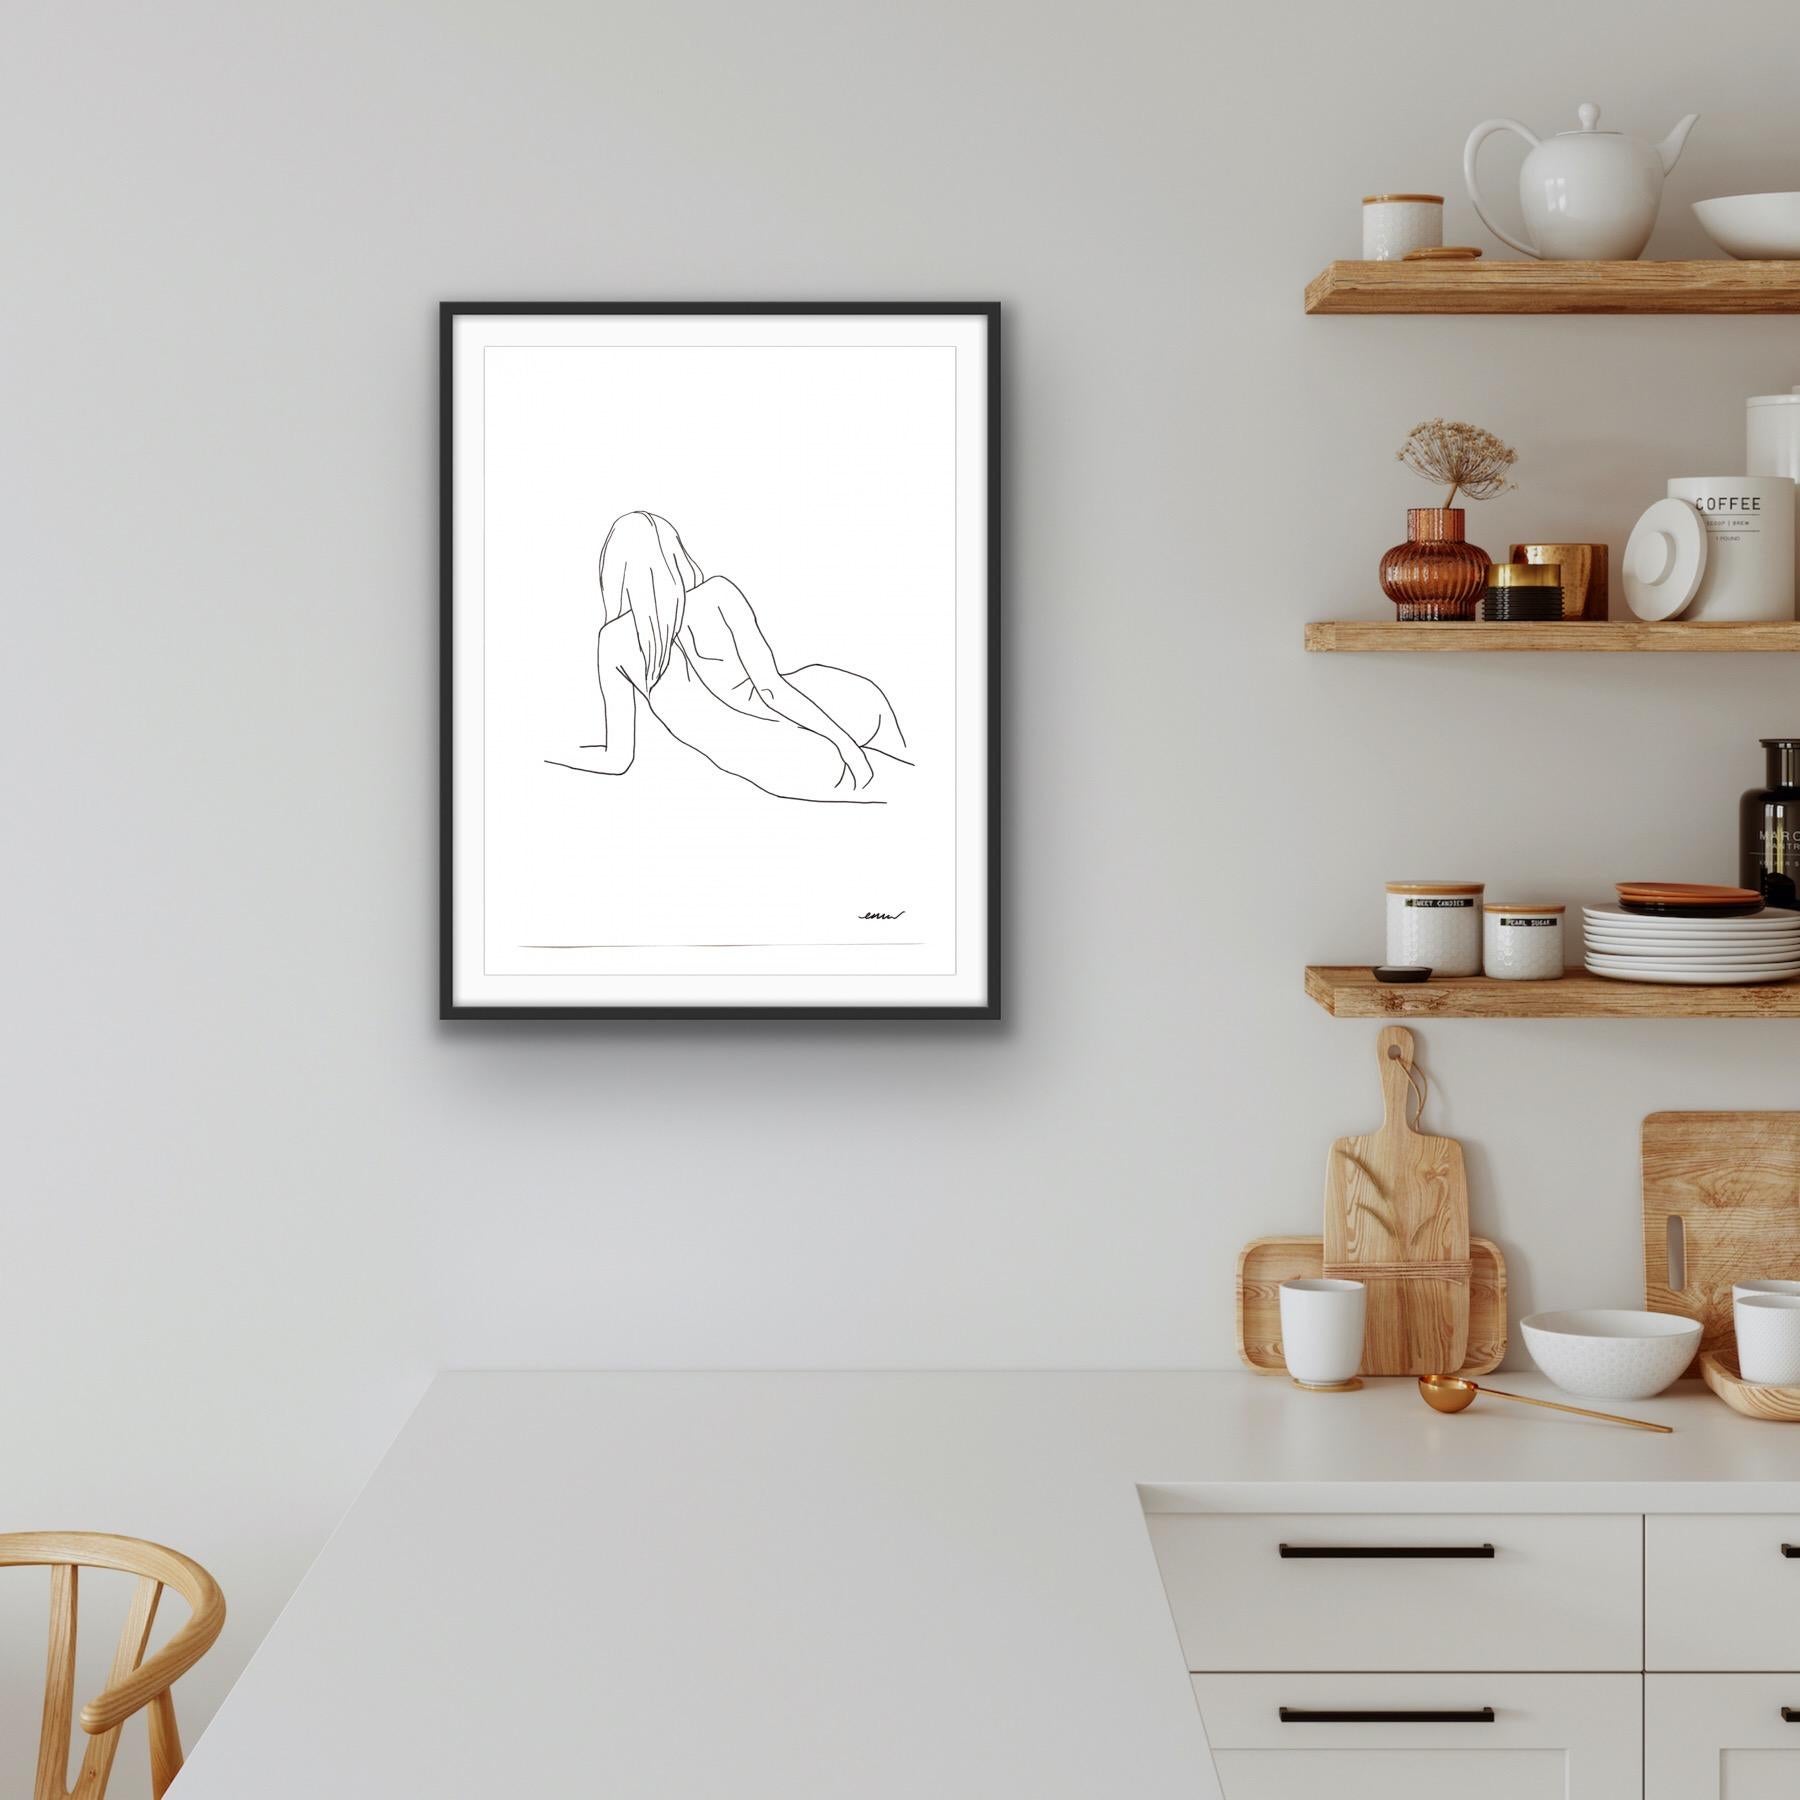 This original drawing by artist Ellen Williams is one in a series of elegant minimal nude studies, using a singular line to interpret the curves of a body.

ADDITIONAL INFORMATION:
Pen on Paper
42 H x 29 W x 0.01 D cm (16.54 x 11.42 x 0.00 in)
Sold